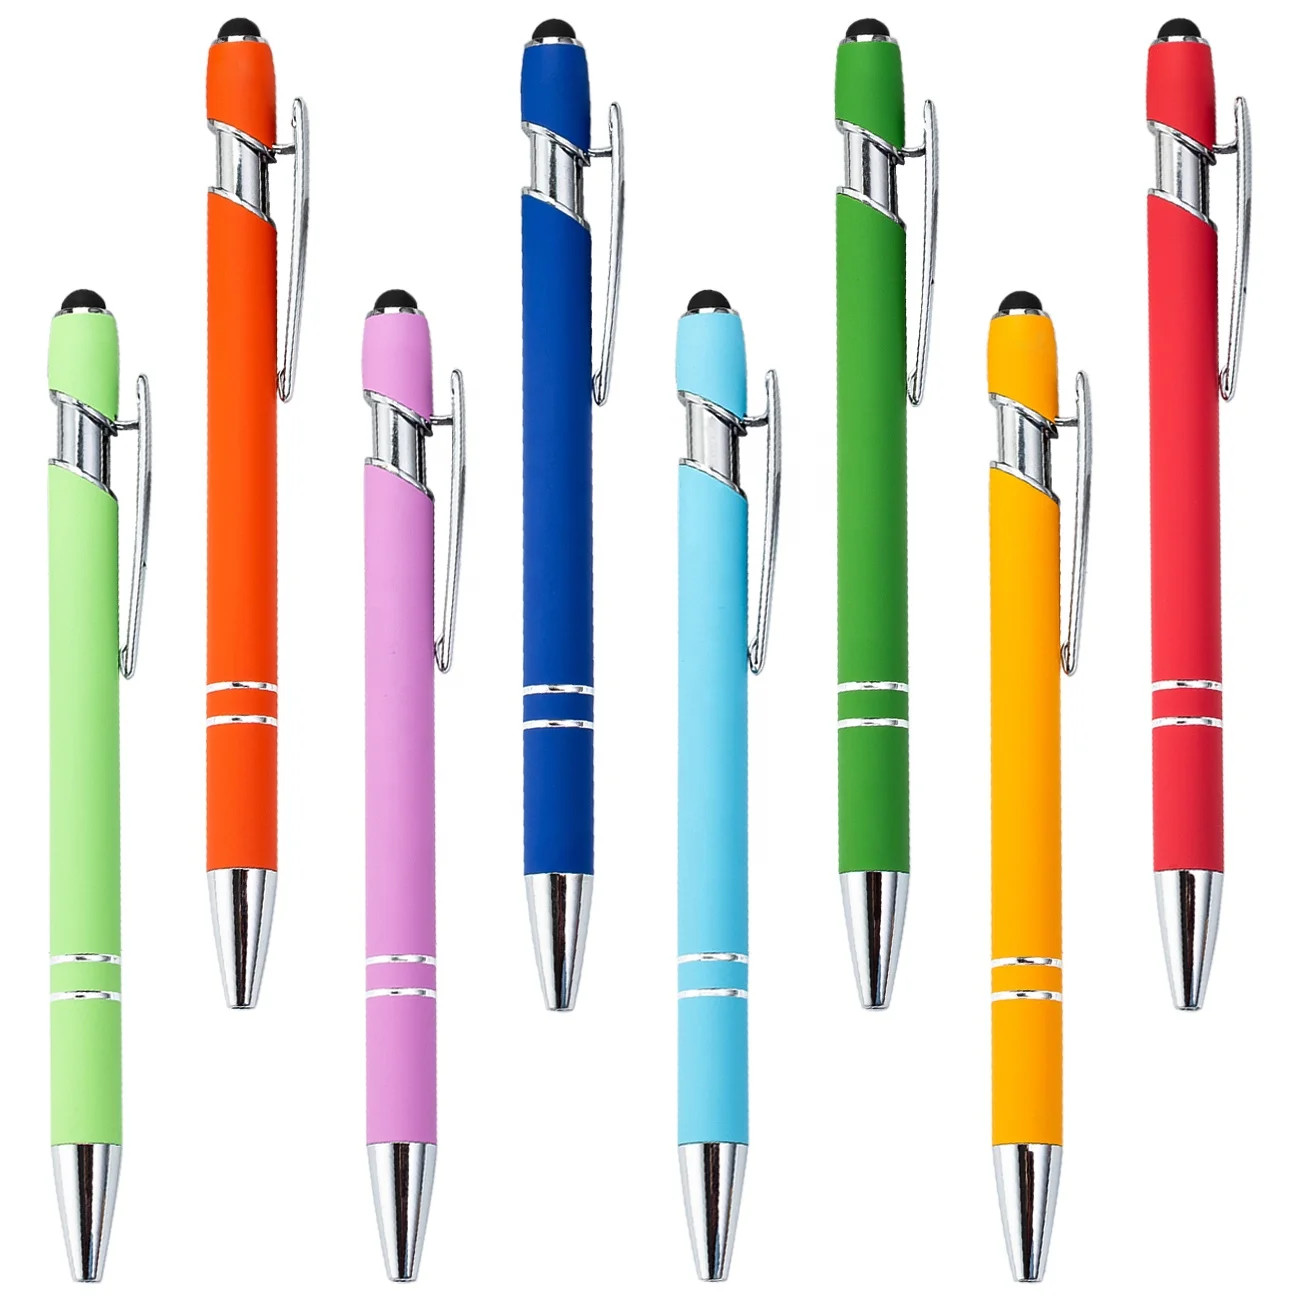 

Promotional 2 In 1 Pen Stylus Touch Pen Mobile Phone Rubber Capacitive Touch Screen Metal Ballpoint Pen With Stylus